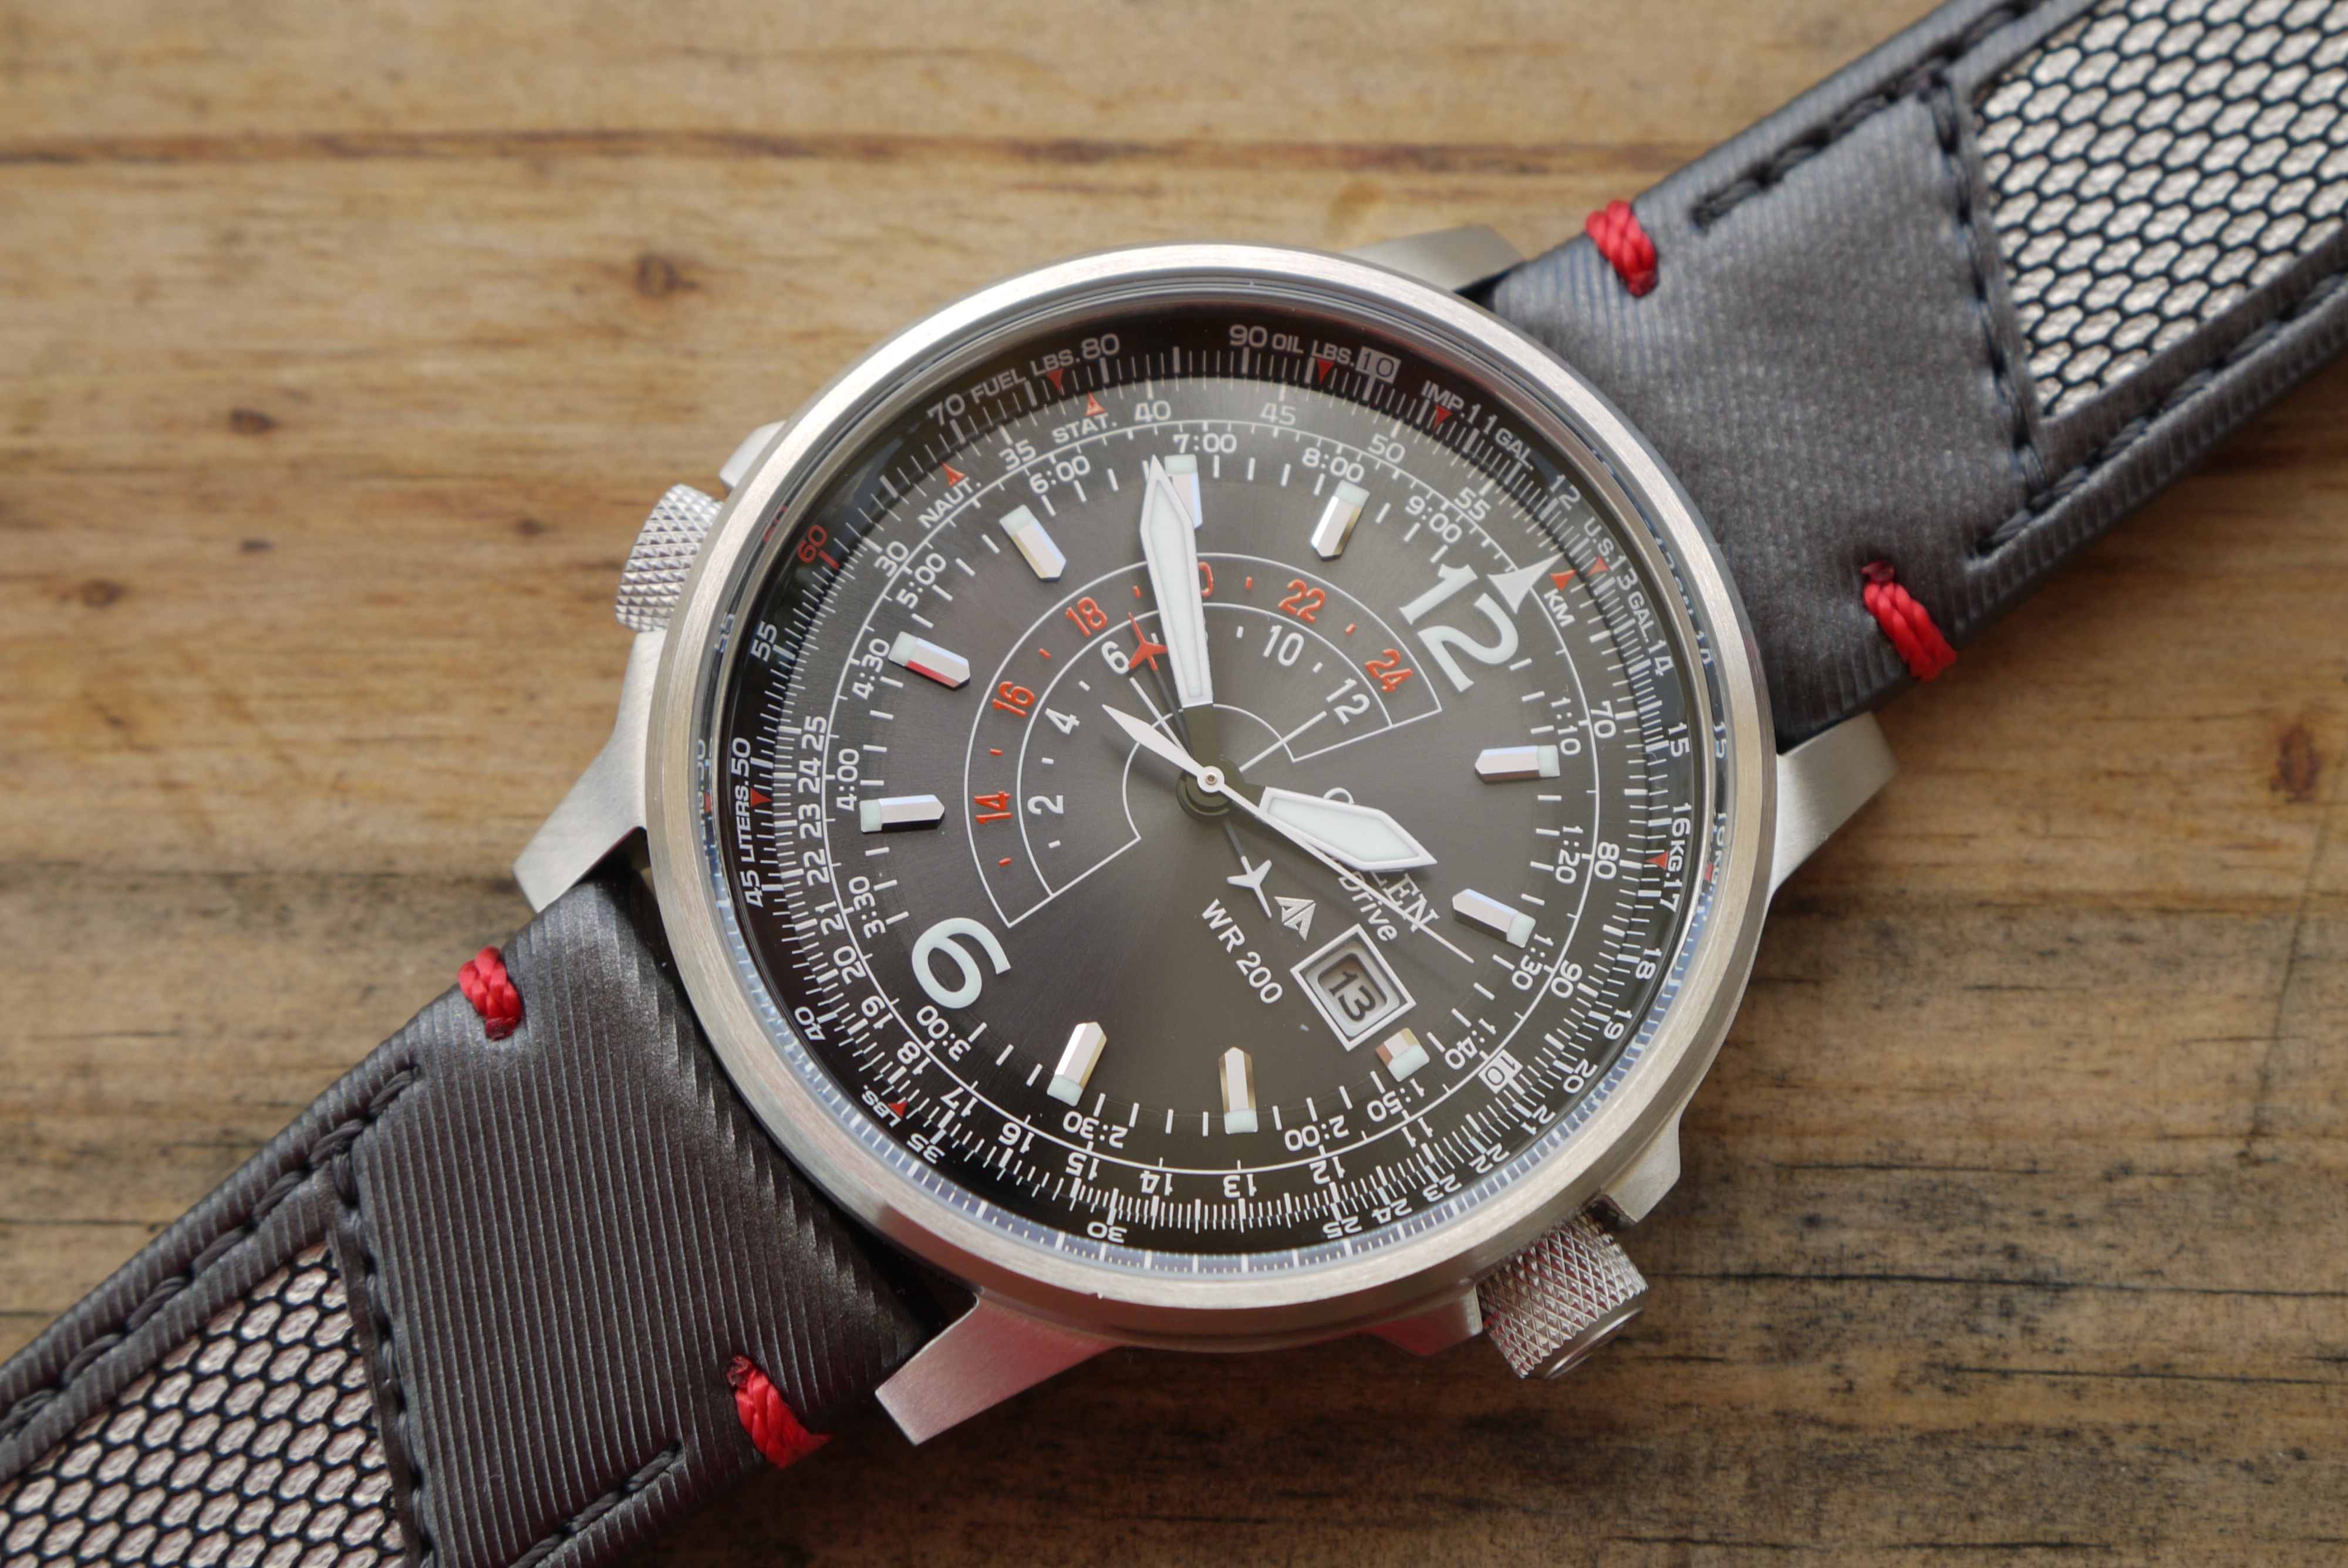 Review: Citizen Promaster Eco-Drive Nighthawk – Takeoff Junkie